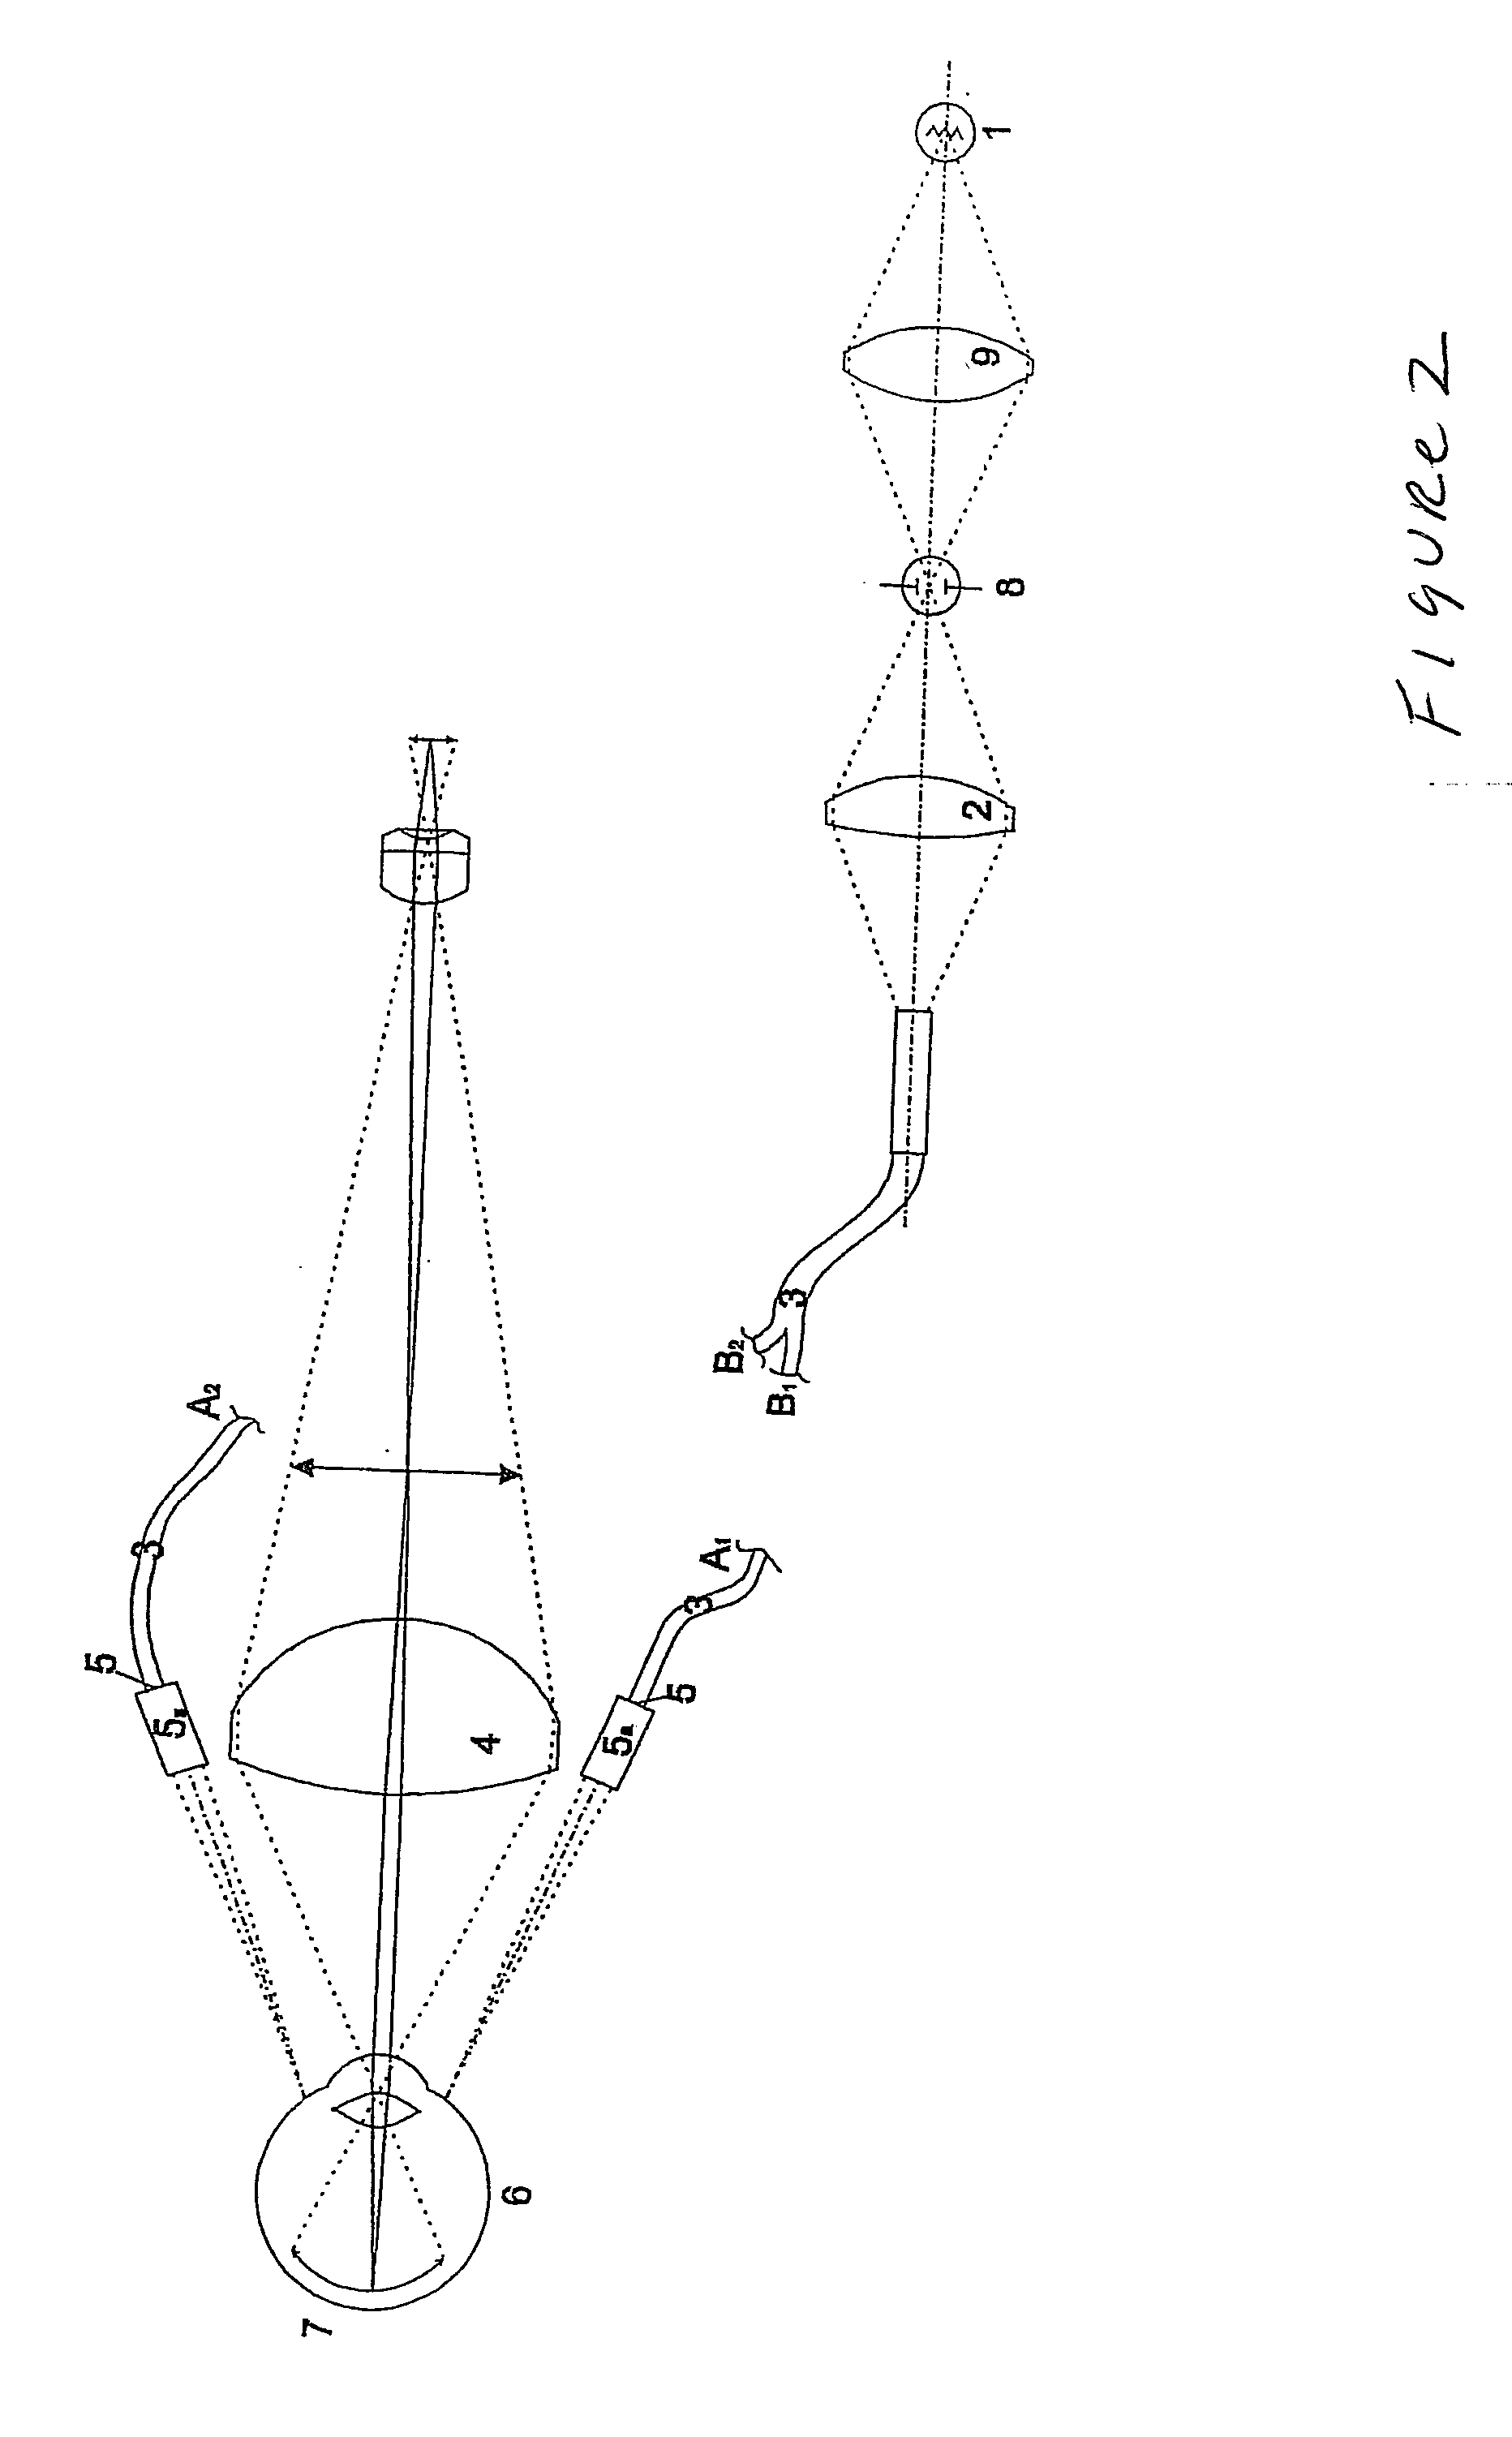 Illumination unit for fundus cameras and/or ophthalmoscopes